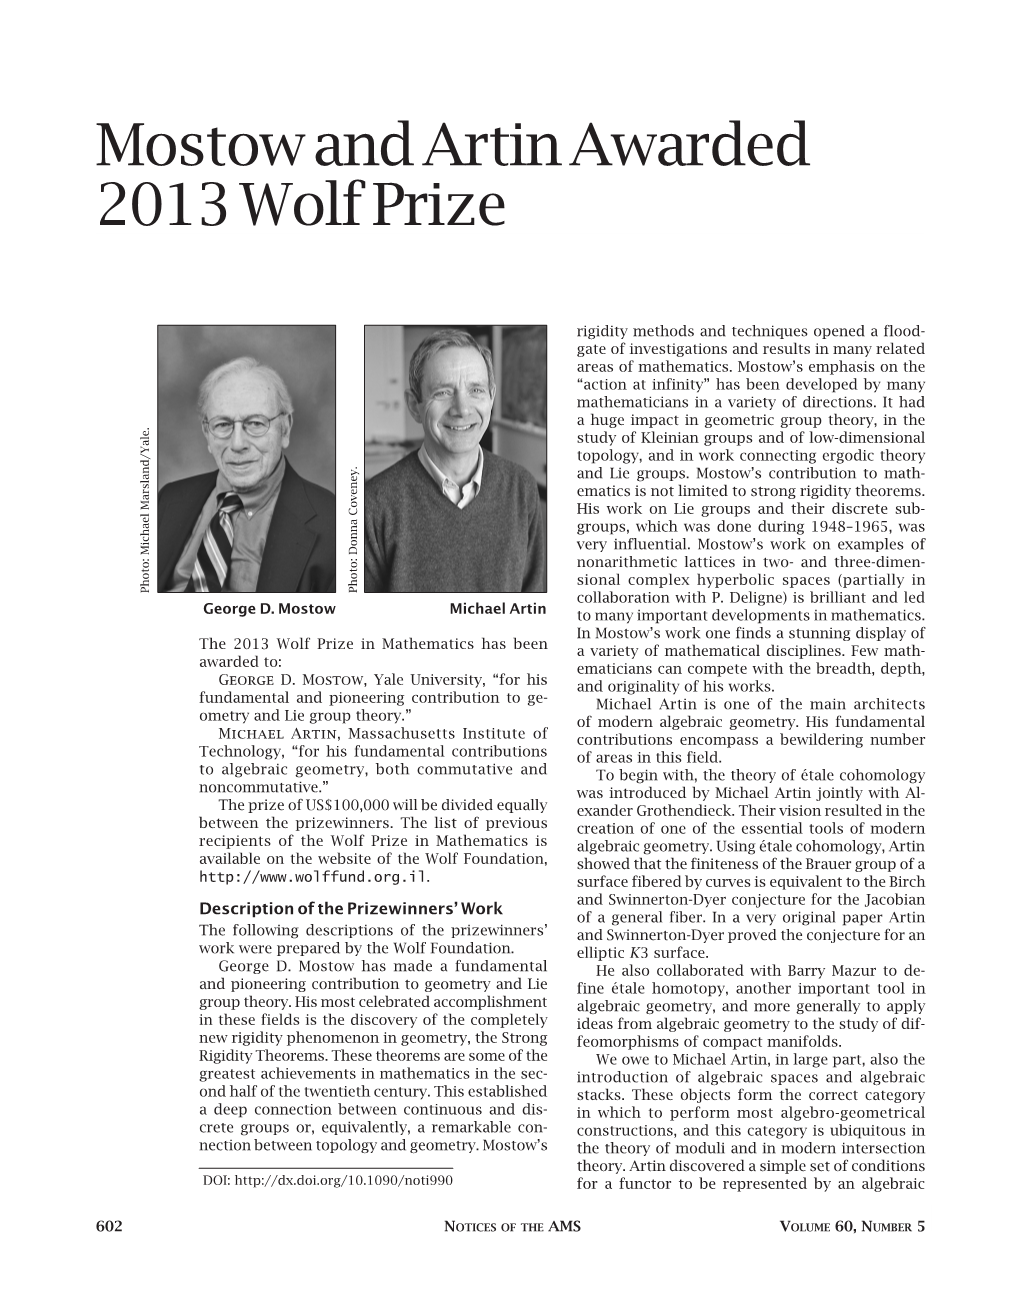 Mostow and Artin Awarded 2013 Wolf Prize